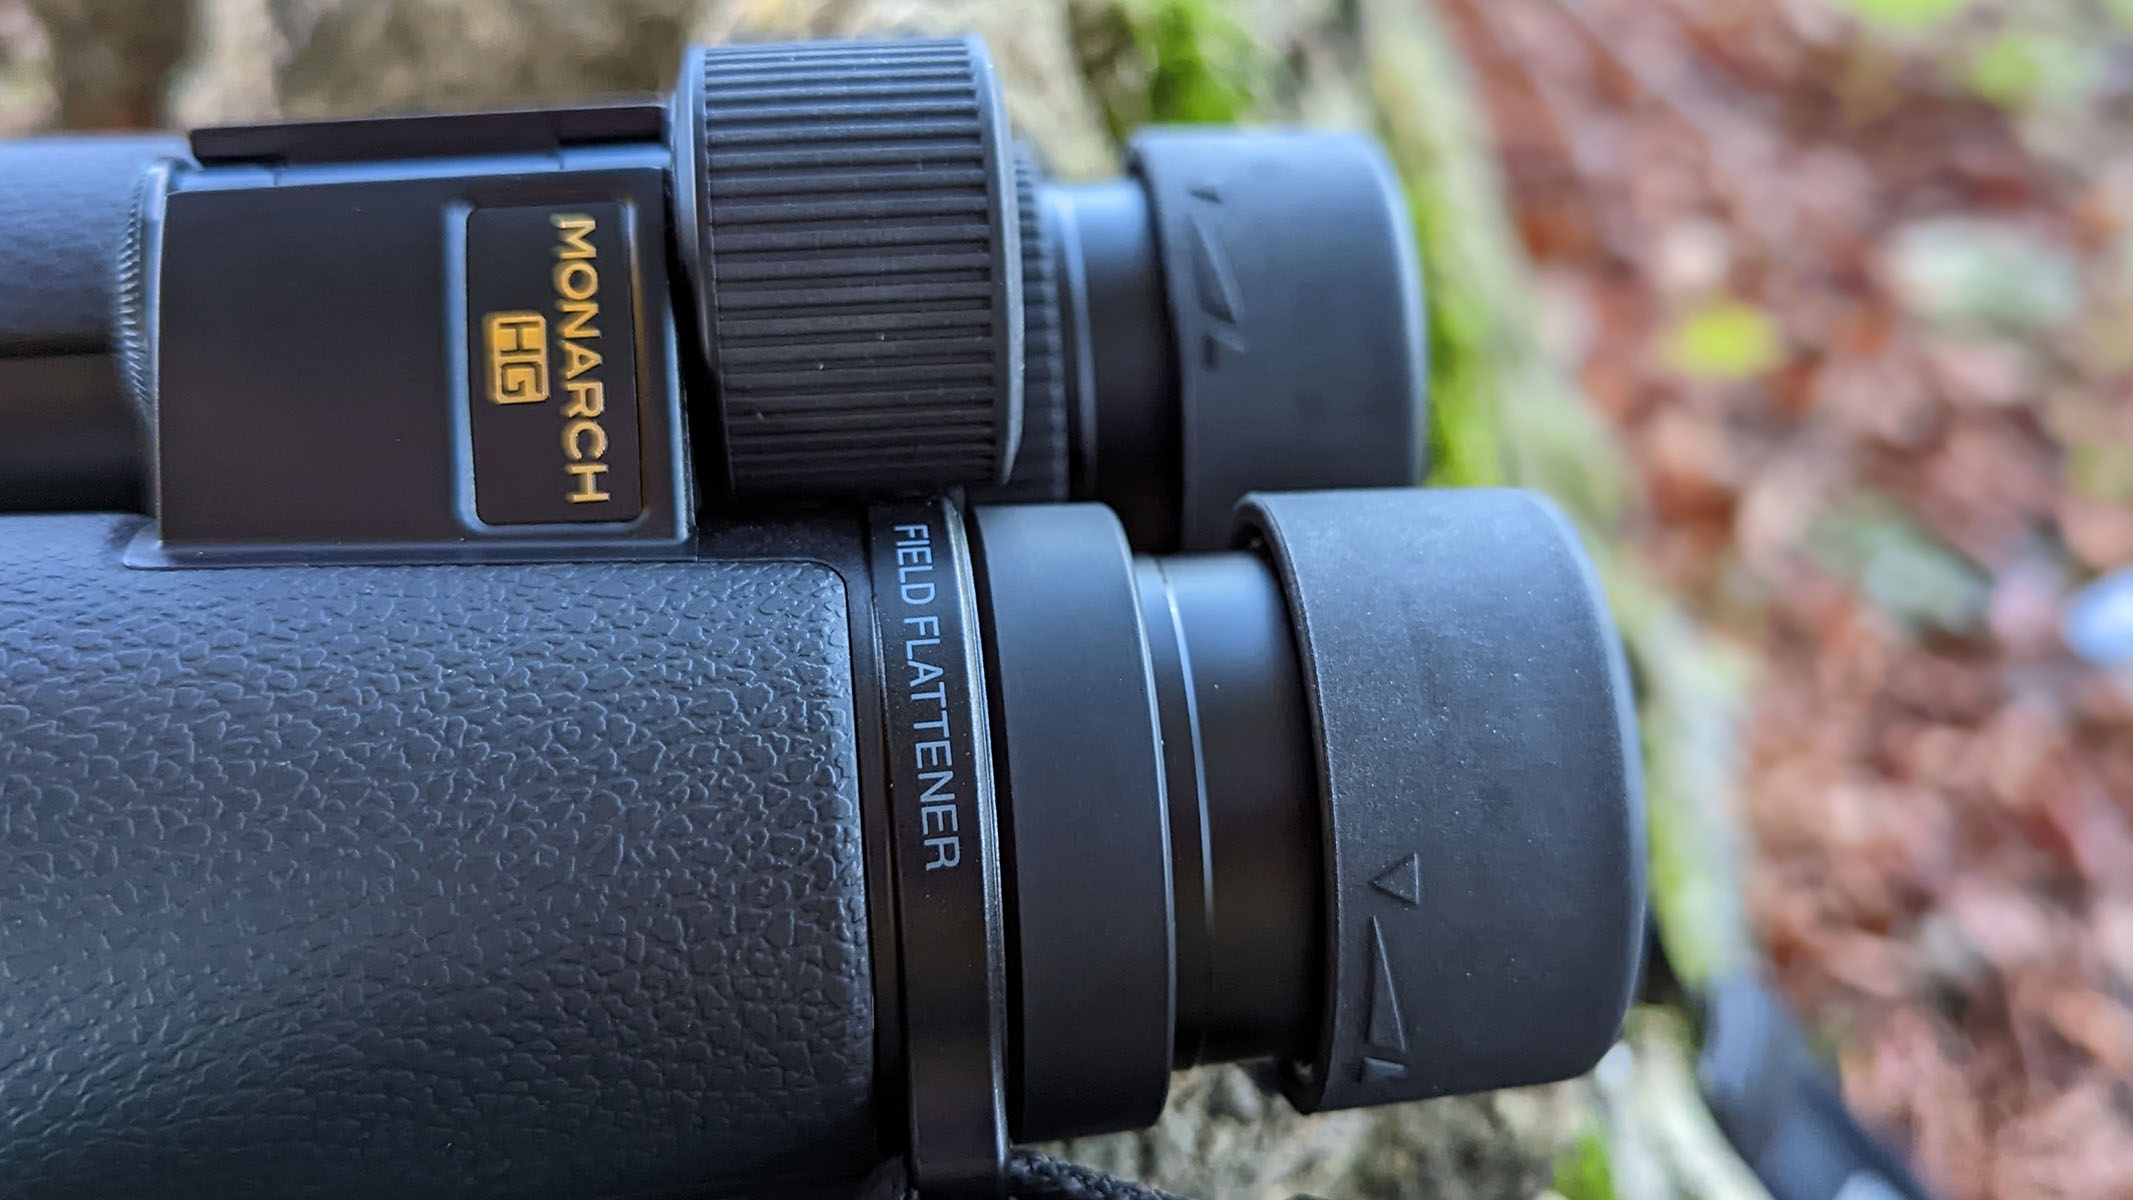 A close up view of the side of the Nikon Monarch HG 10x42 binoculars